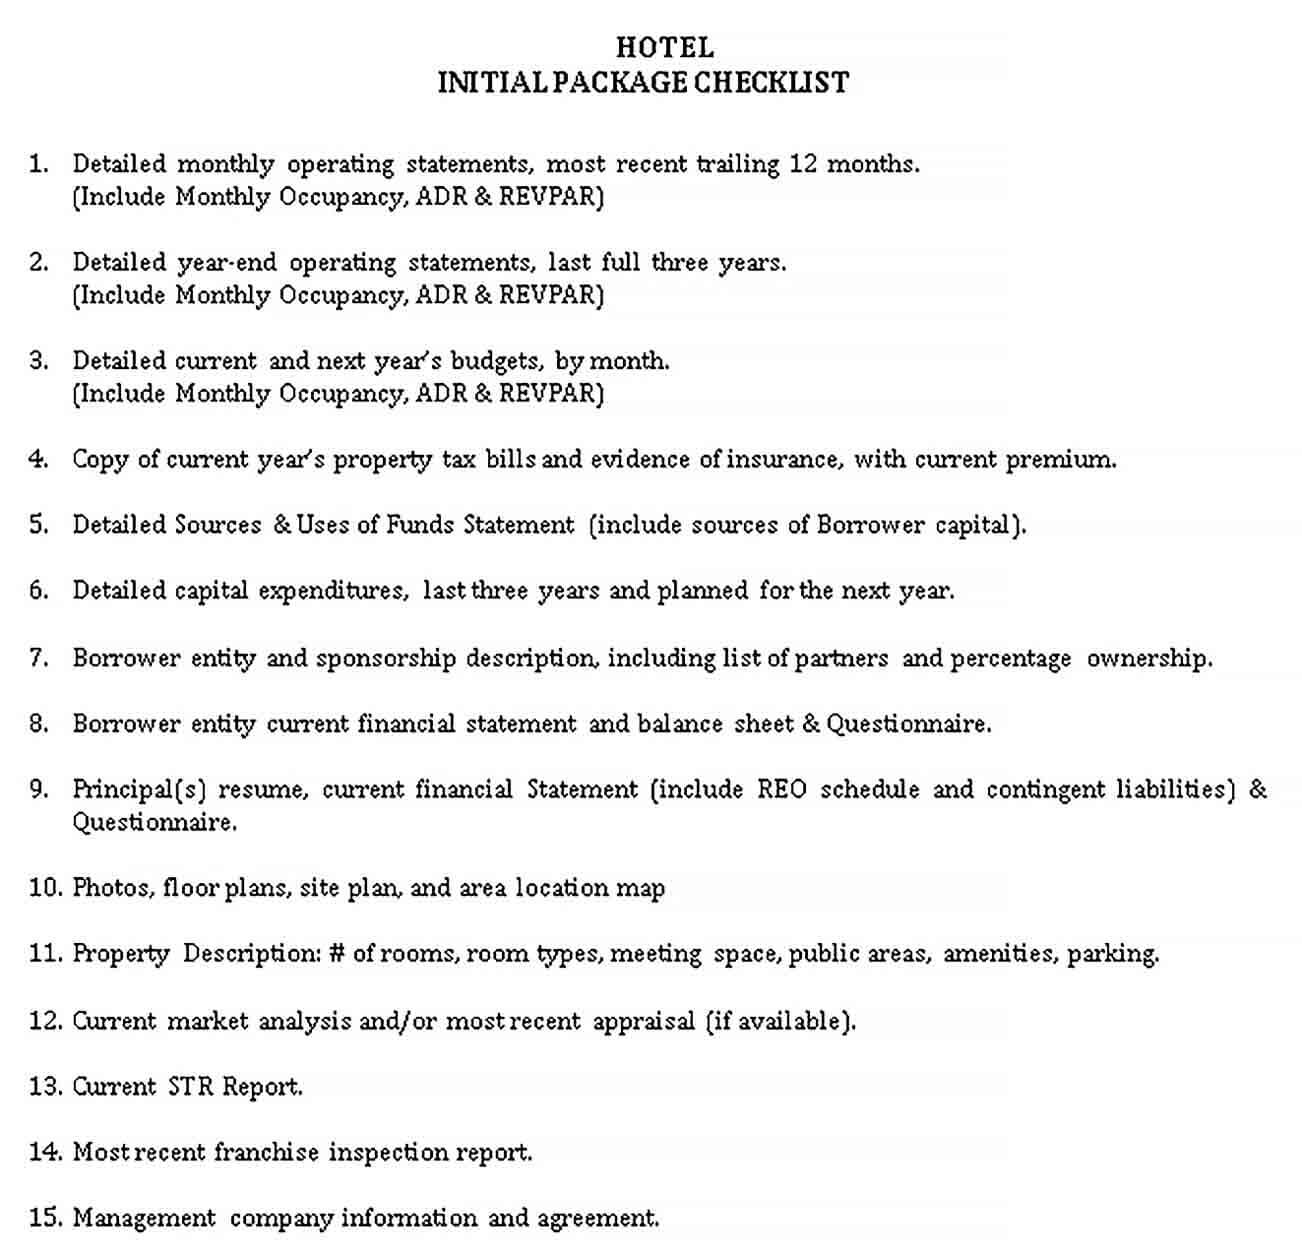 Sample Hotel Checklist for Package Template